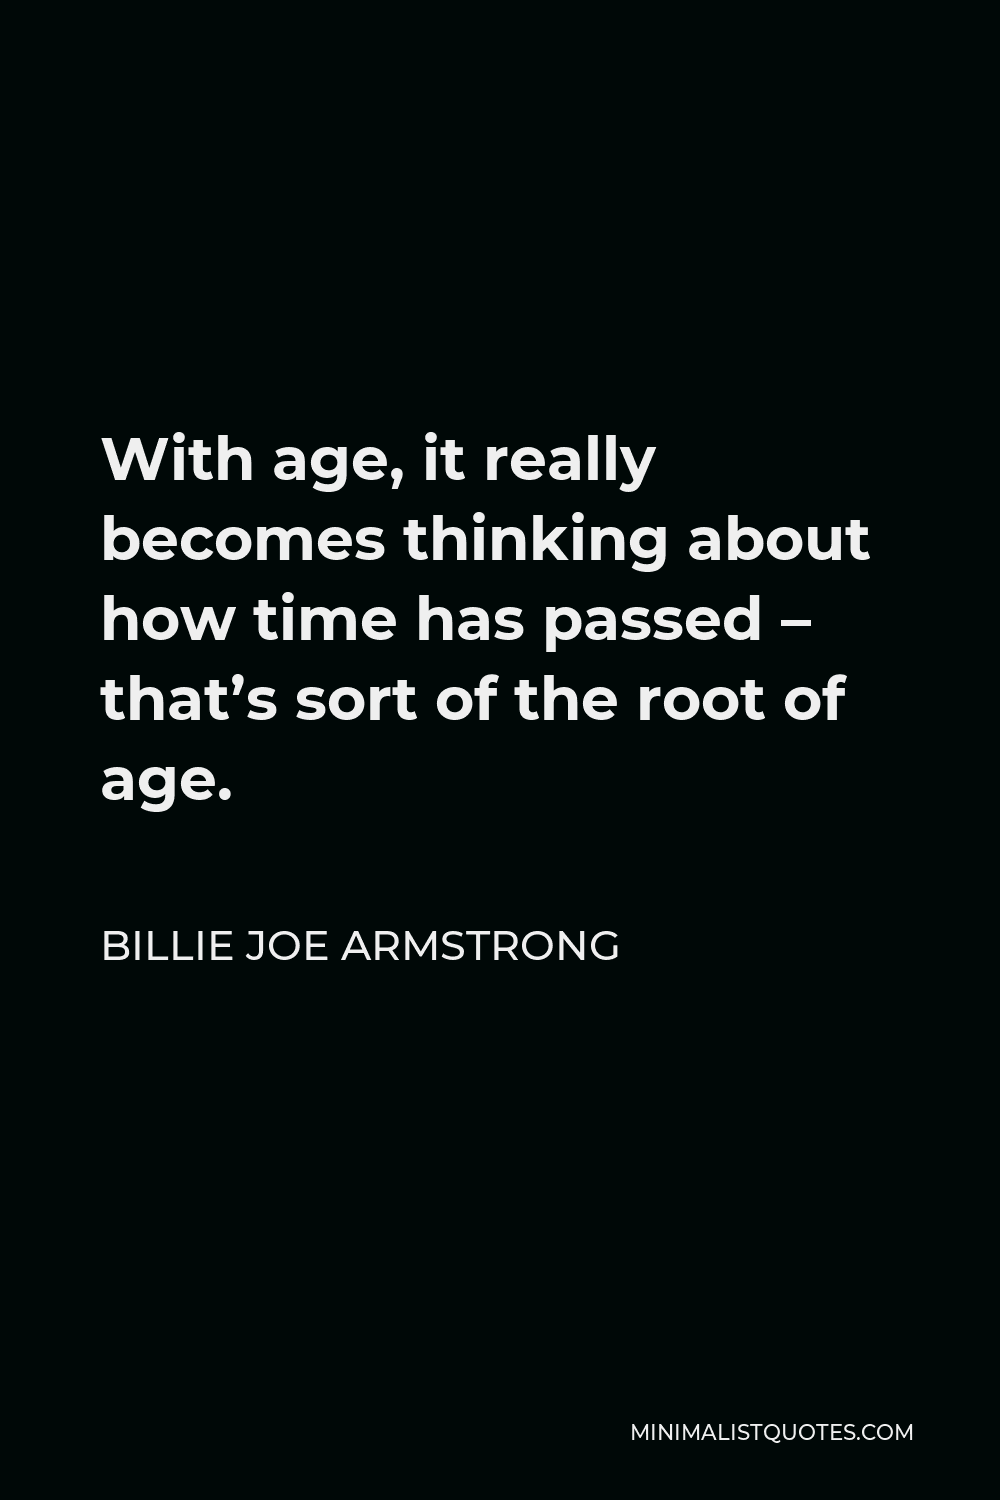 Billie Joe Armstrong Quote - With age, it really becomes thinking about how time has passed – that’s sort of the root of age.